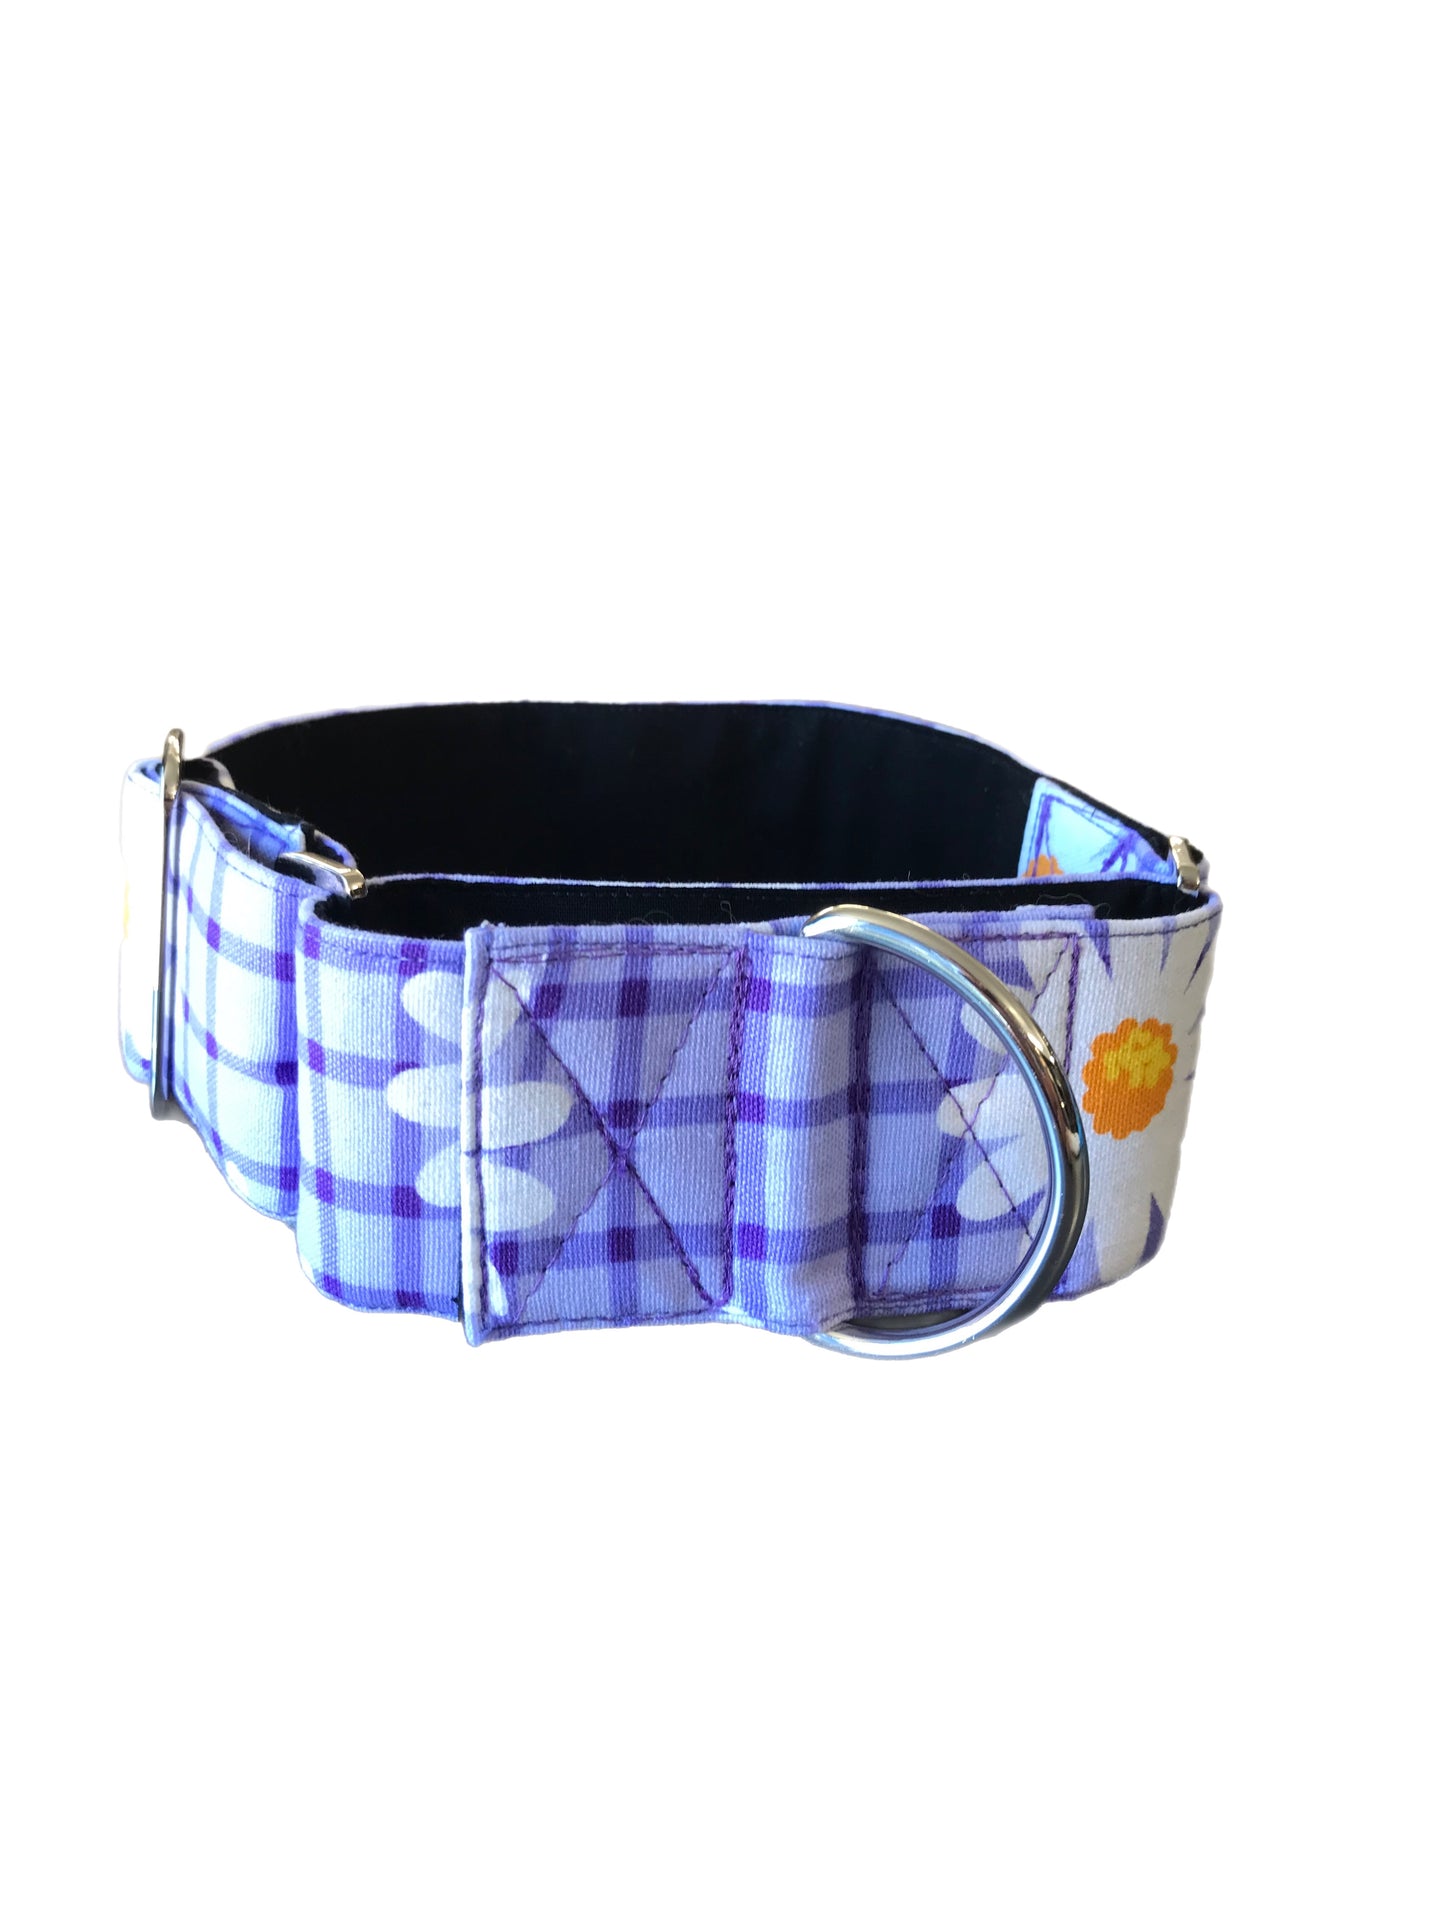 Wide Martingale collar purple daisies 50mm width